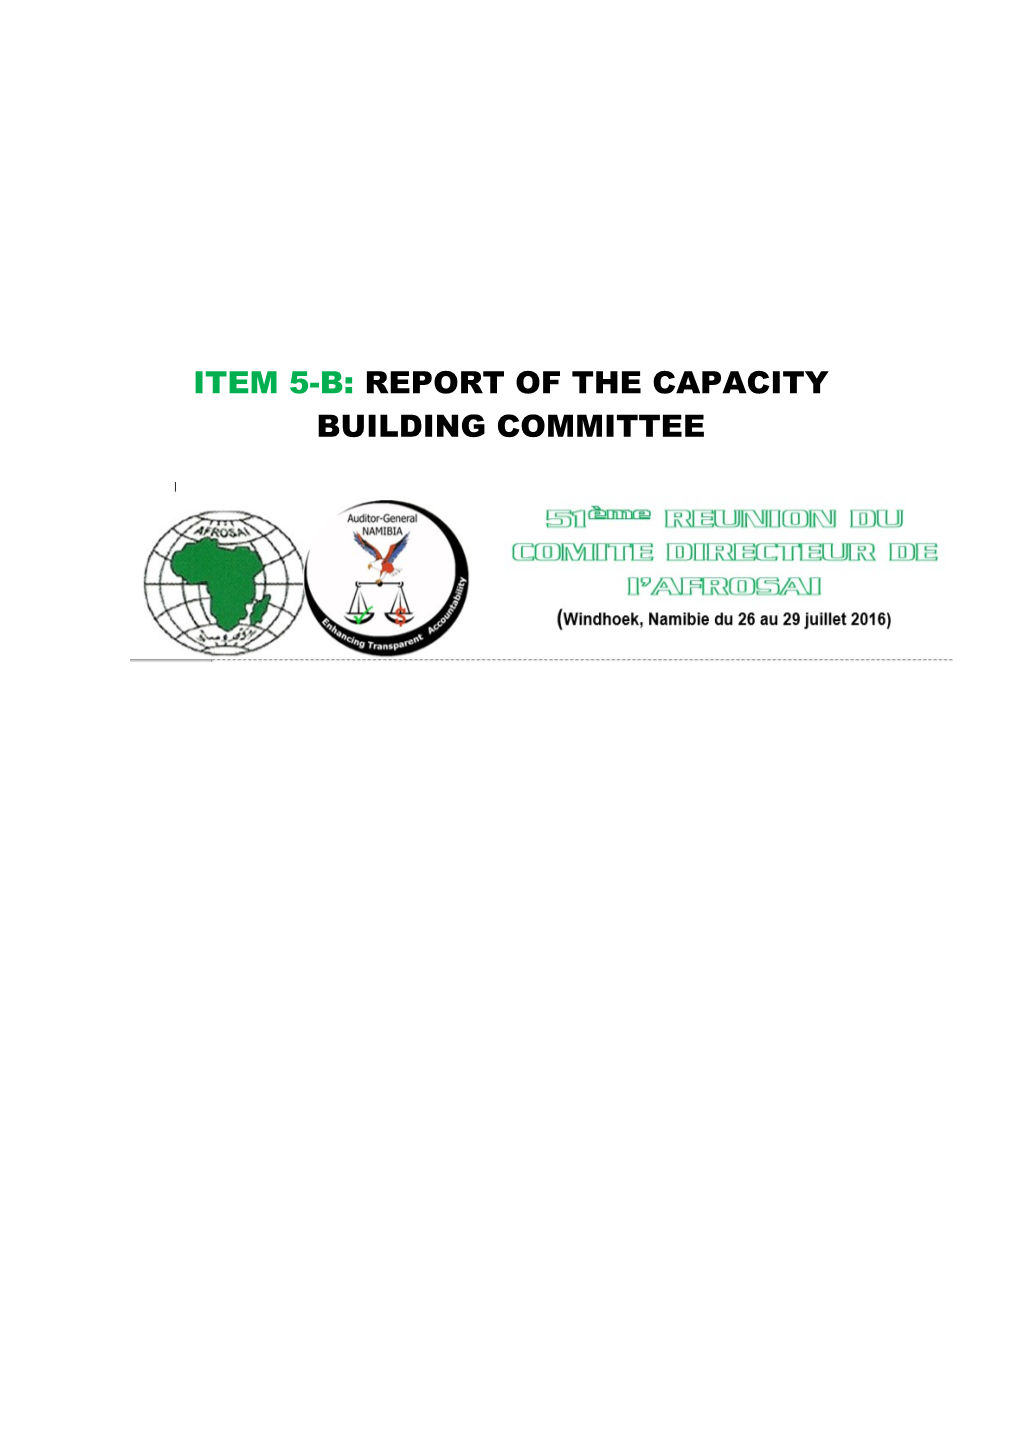 Item 5-B: Report of the Capacity Building Committee